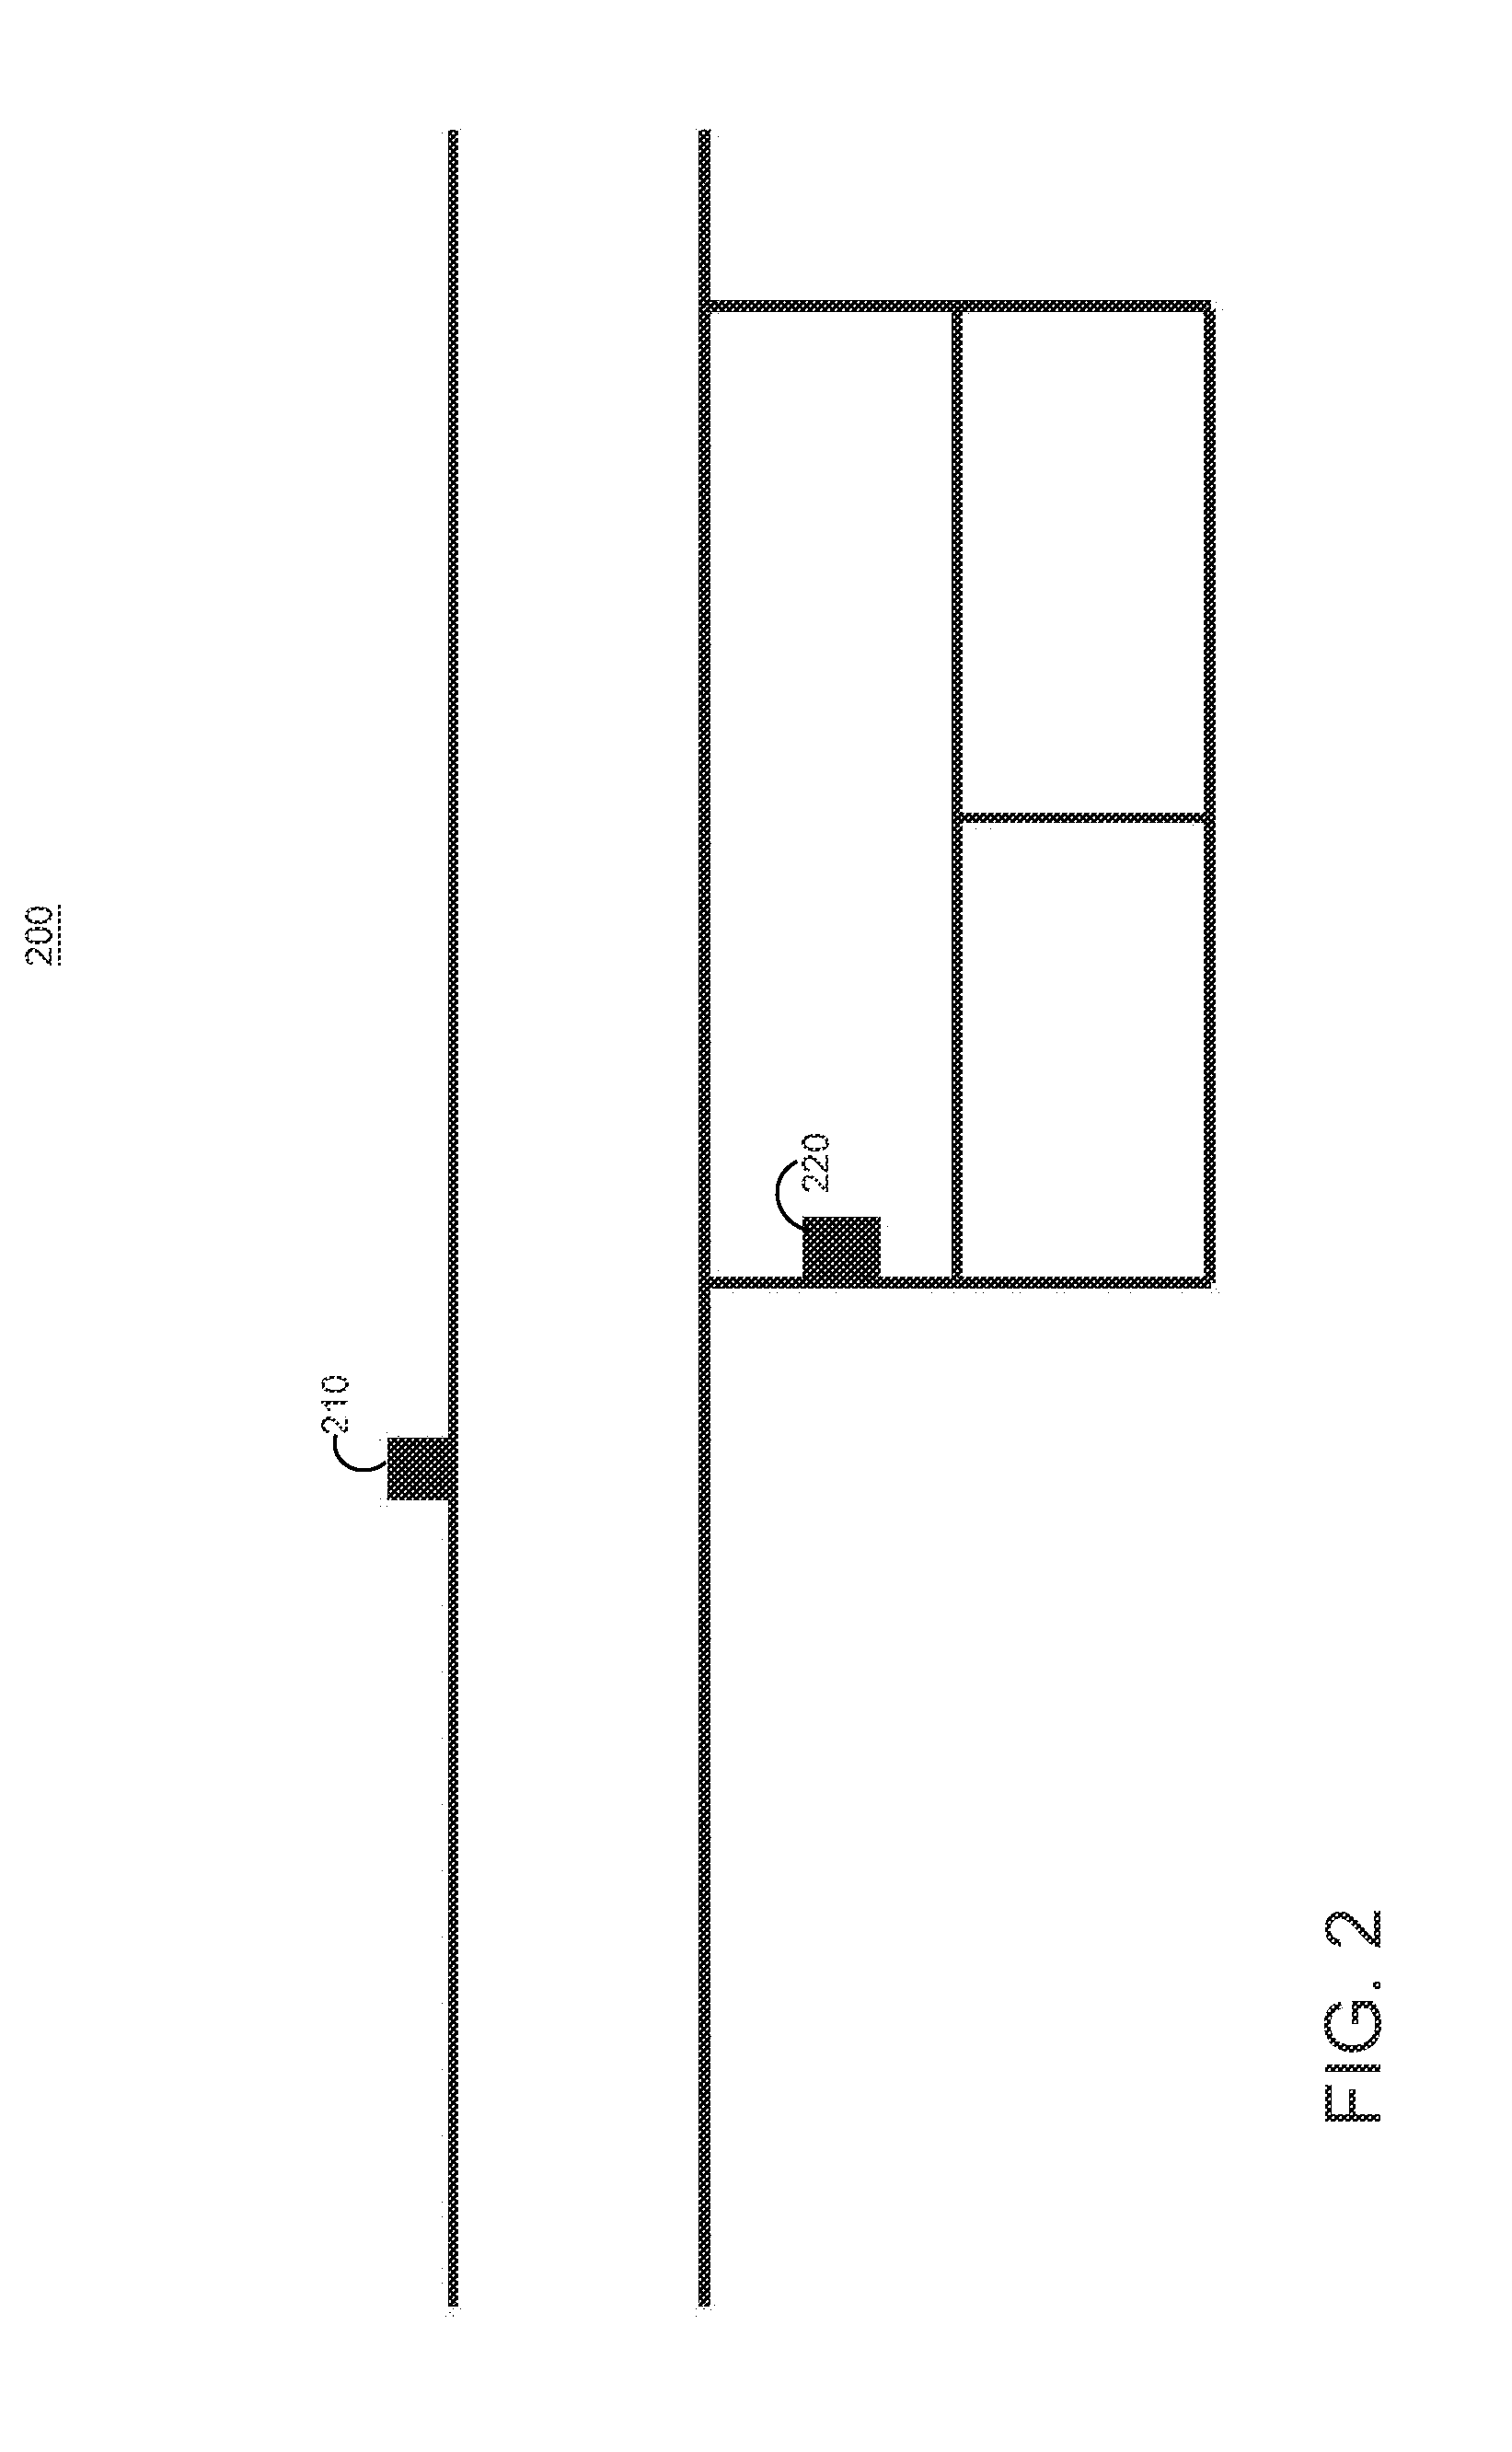 Systems and Methods for Monitoring Health in a Shared Living Environment